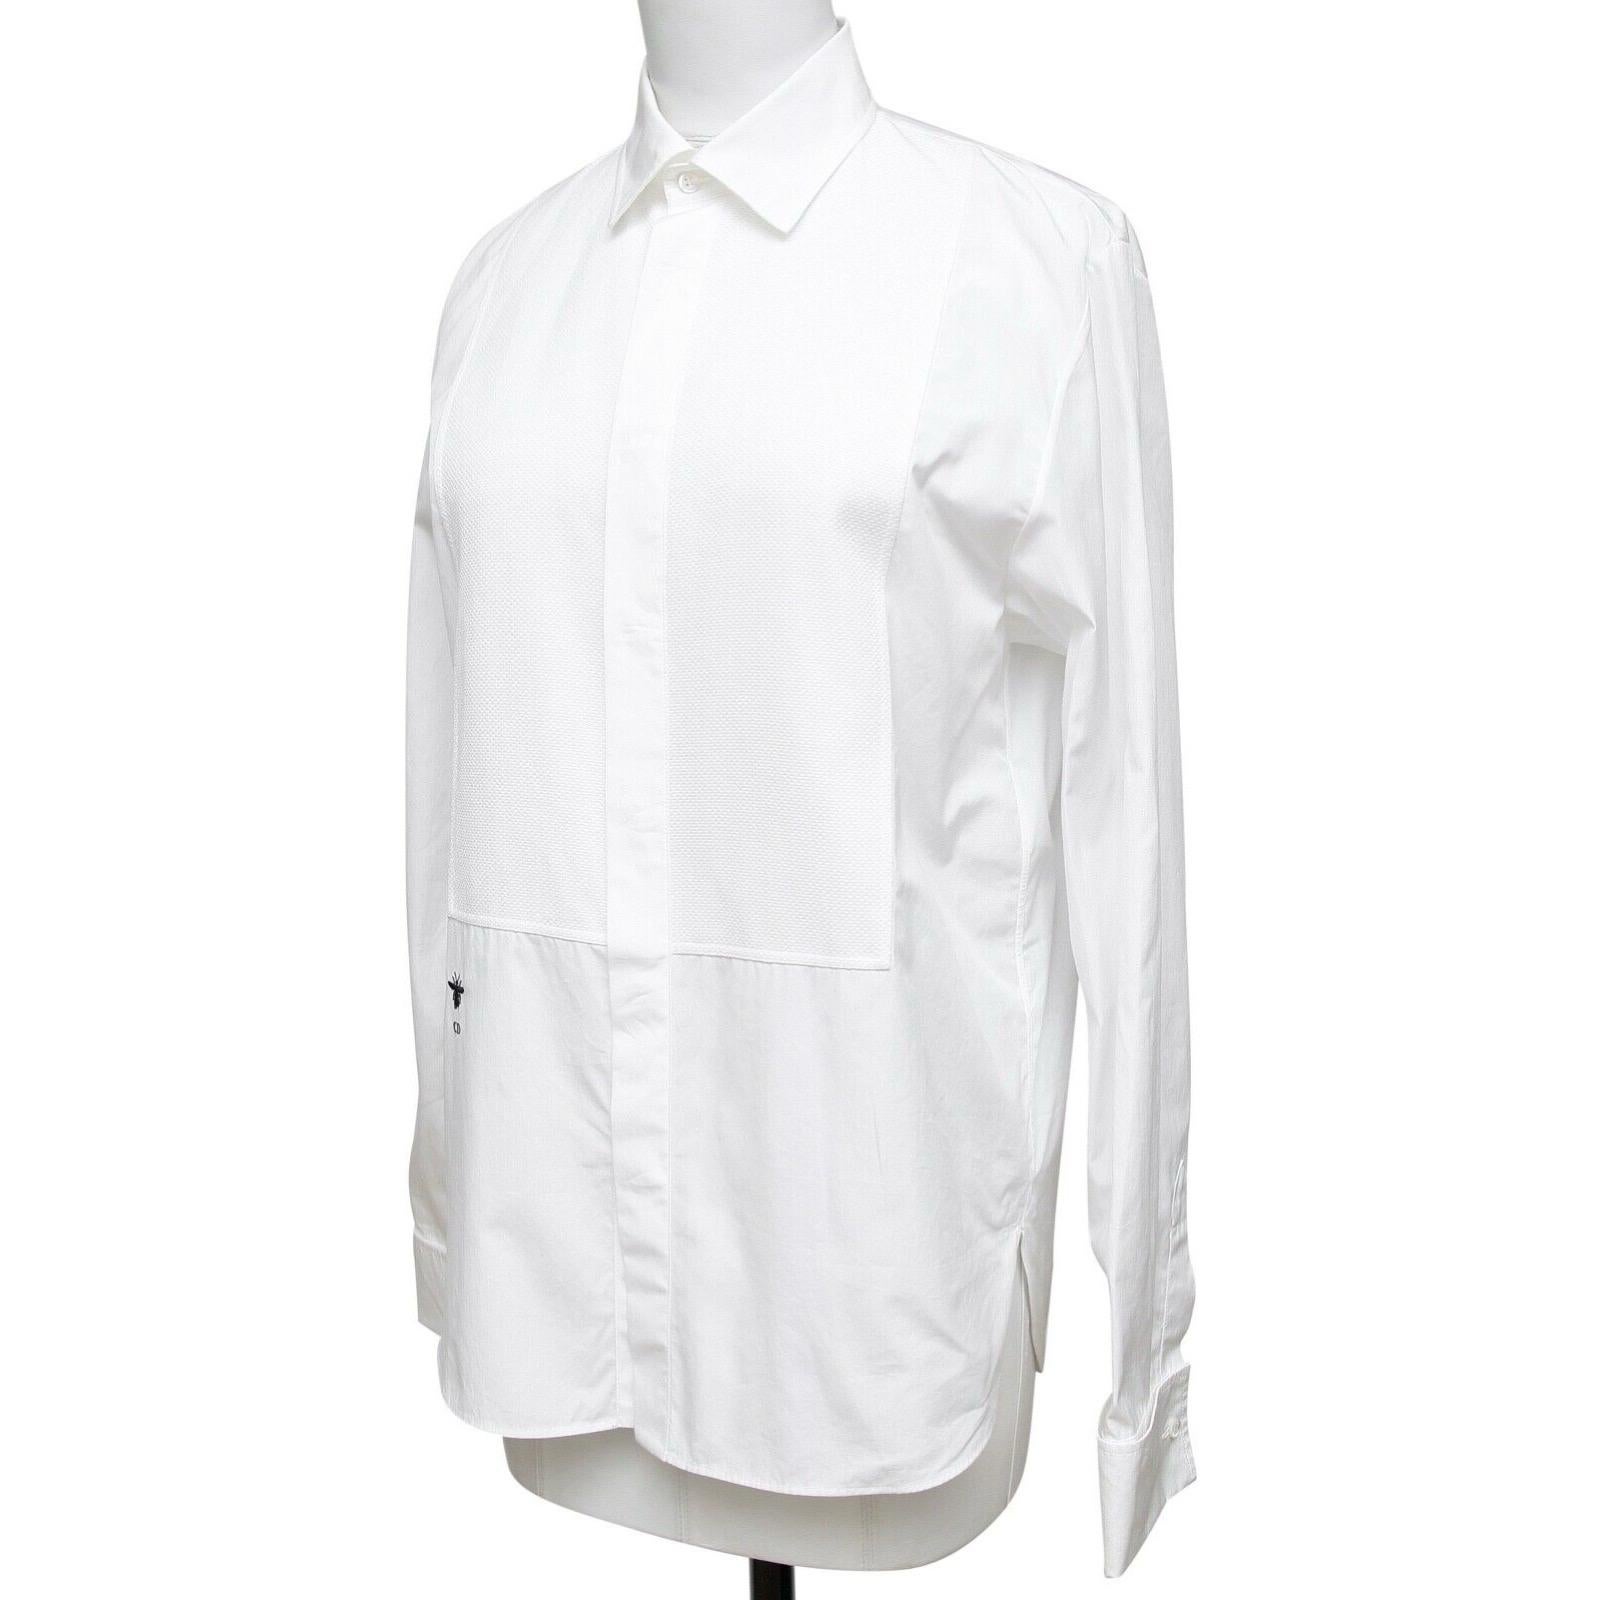 GUARANTEED AUTHENTIC DIOR WHITE COTTON POPLON PLASTRON BLOUSE

Retails excluding sales taxes $1,350

Design:
- Comfortable to wear button down white shirt.
- Pointed collar.
- Plastron design.
- Long sleeve, button at each cuff.

Size: 36

Material: